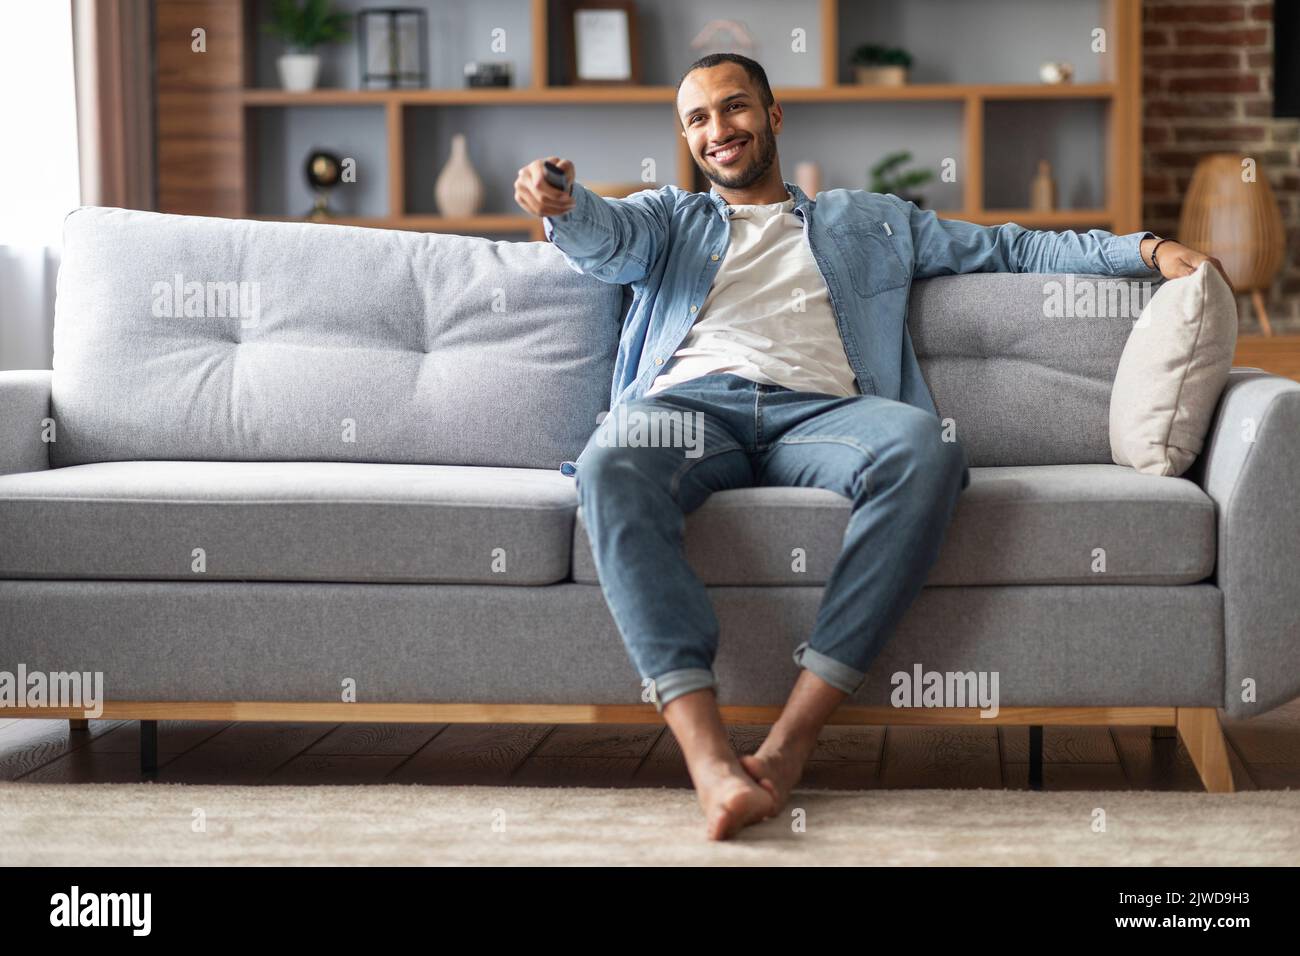 Home Relax. Handsome Black Man Sitting On Couch And Switching Tv Channels Stock Photo